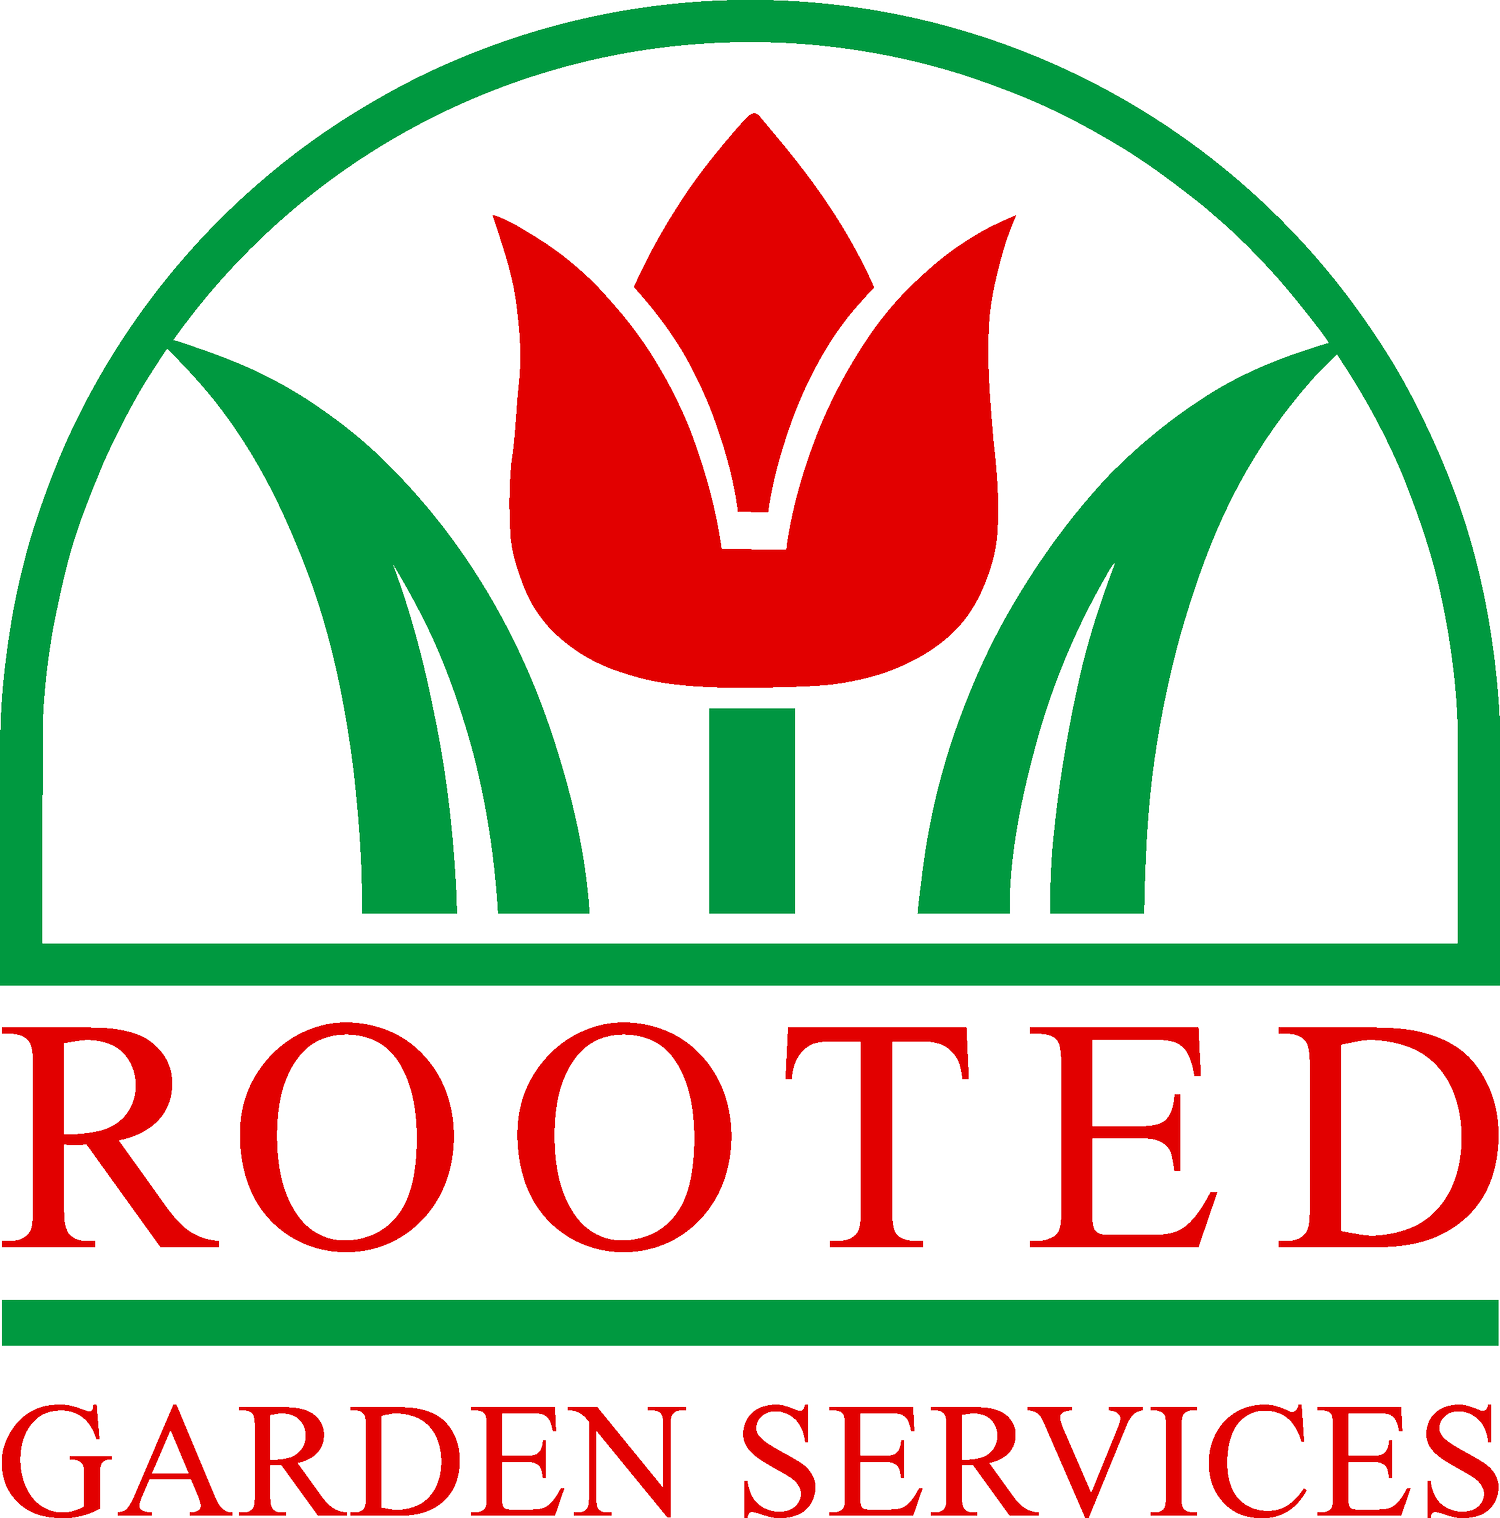 Rooted Gardens Services